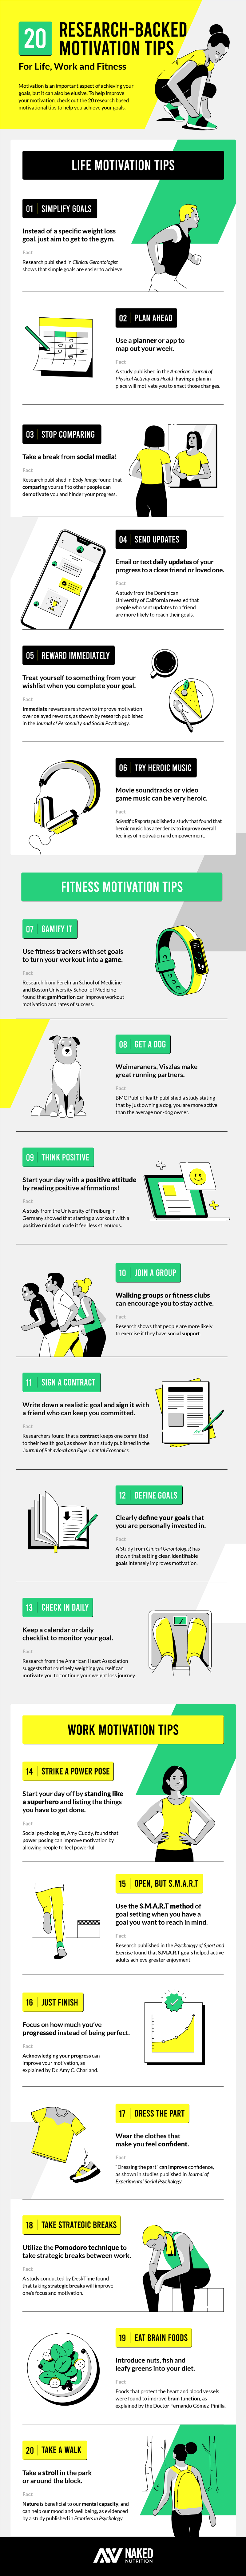 motivation tips infographic